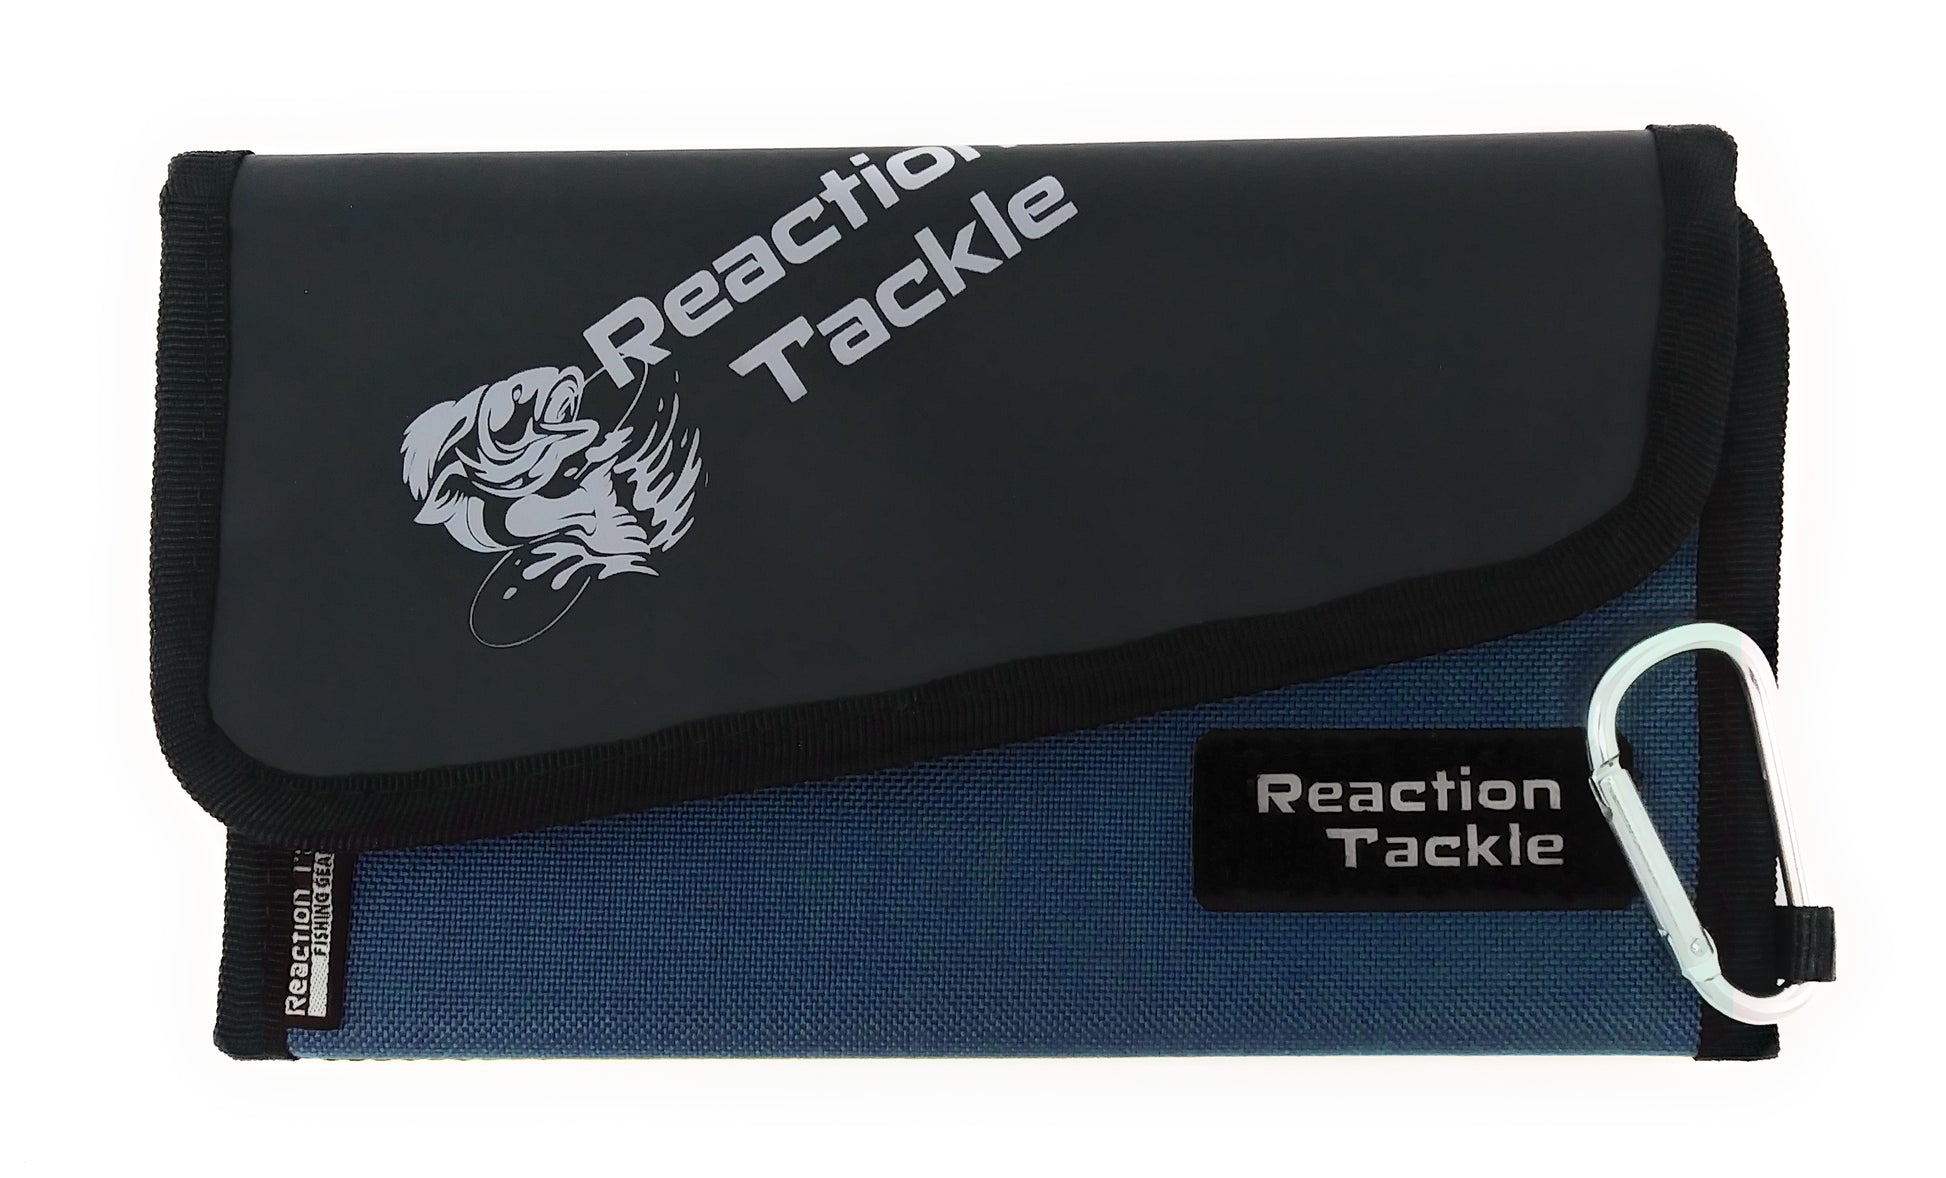 Buy Reaction Tackle Small Bait Binder- Blue Online at Lowest Price